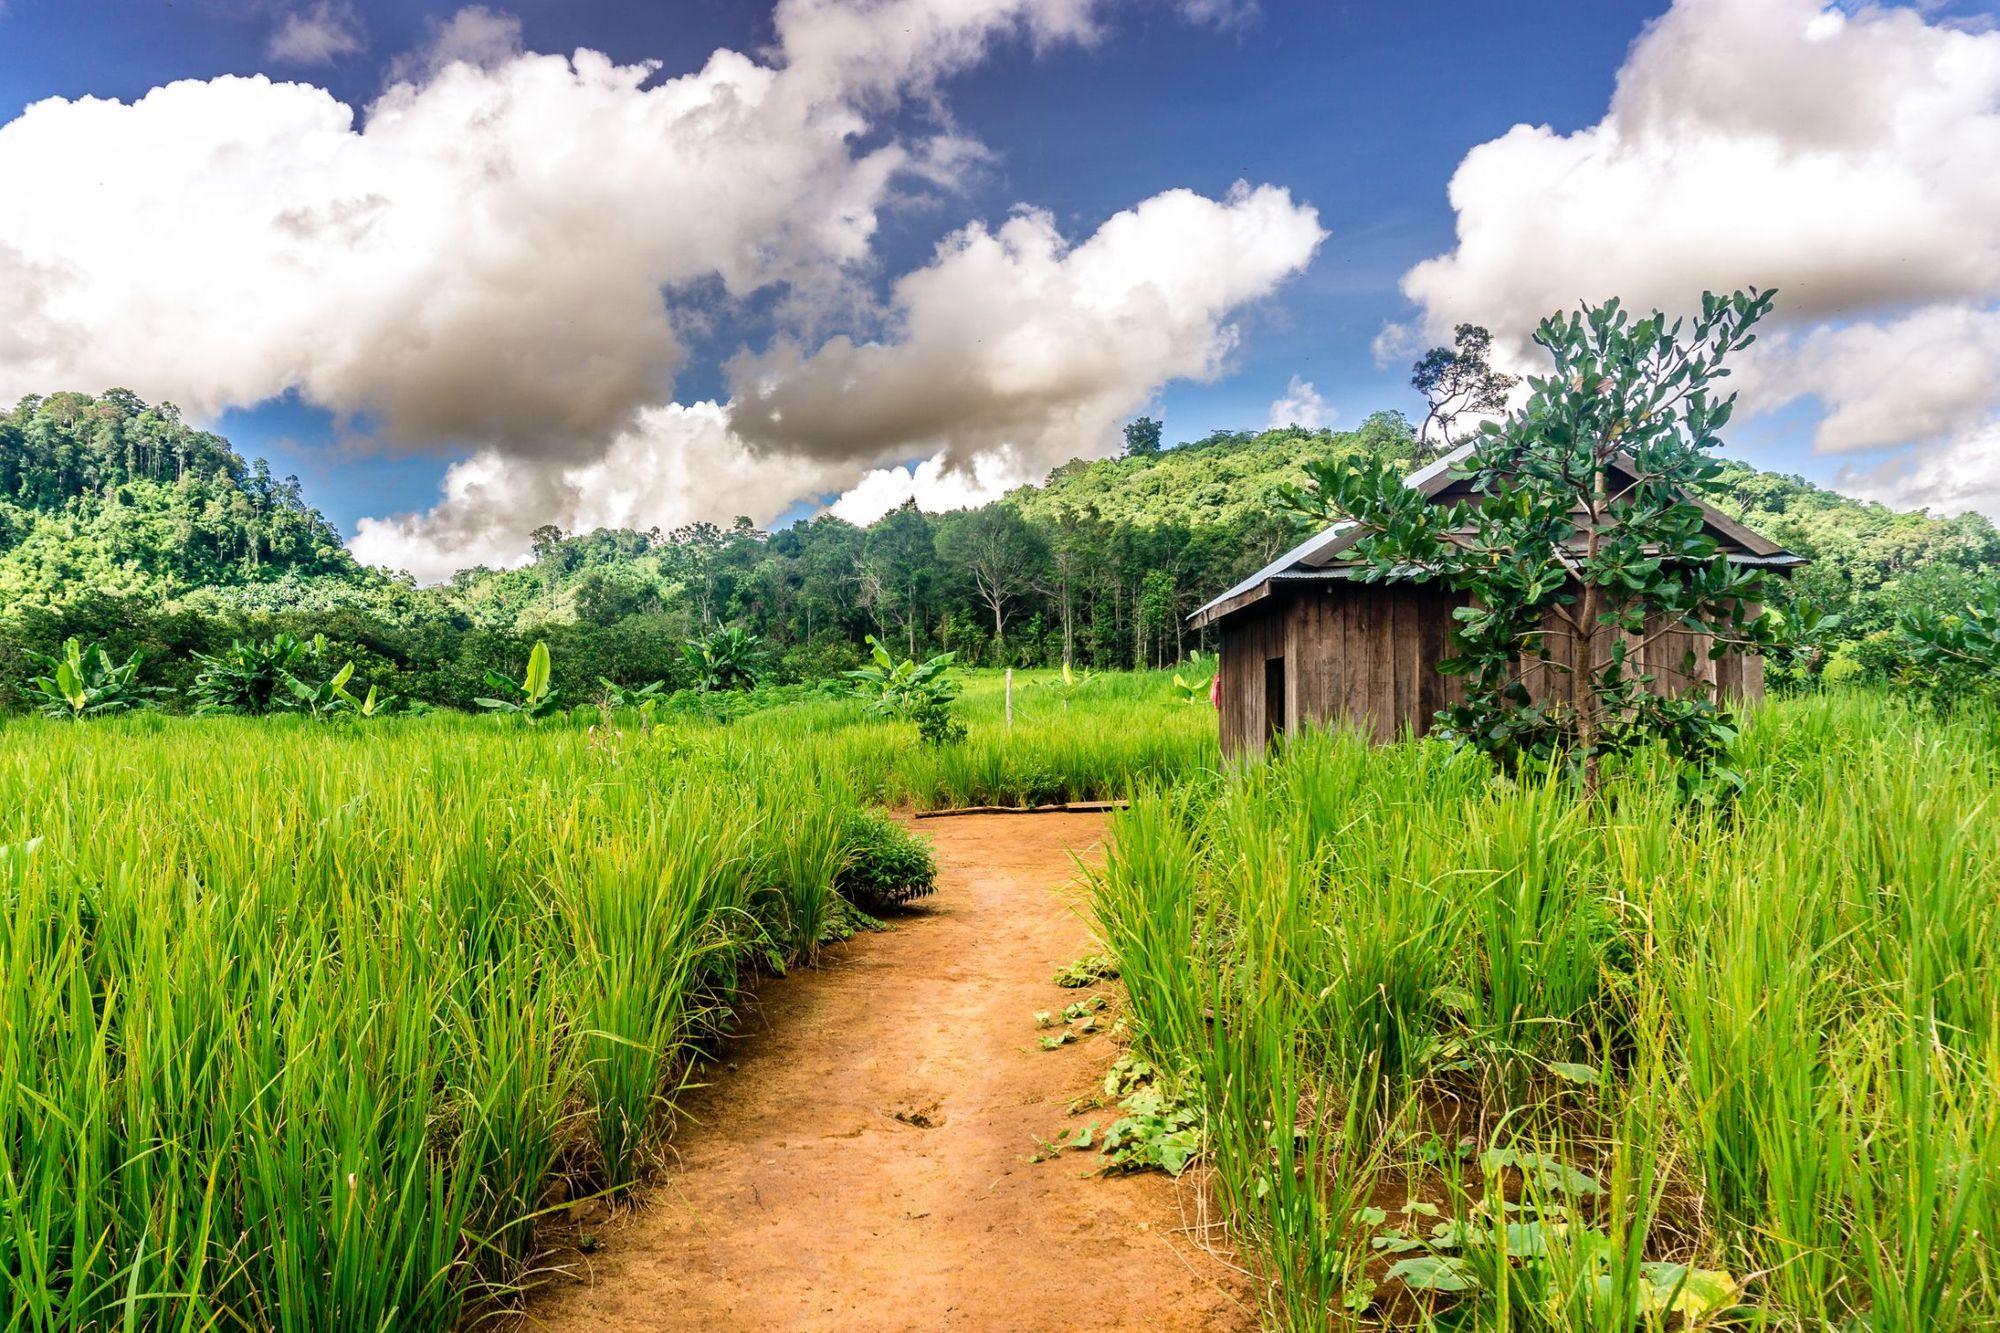 The landscape on an 18km hike to a Bunong Village in Cambodia. Photo: Getty